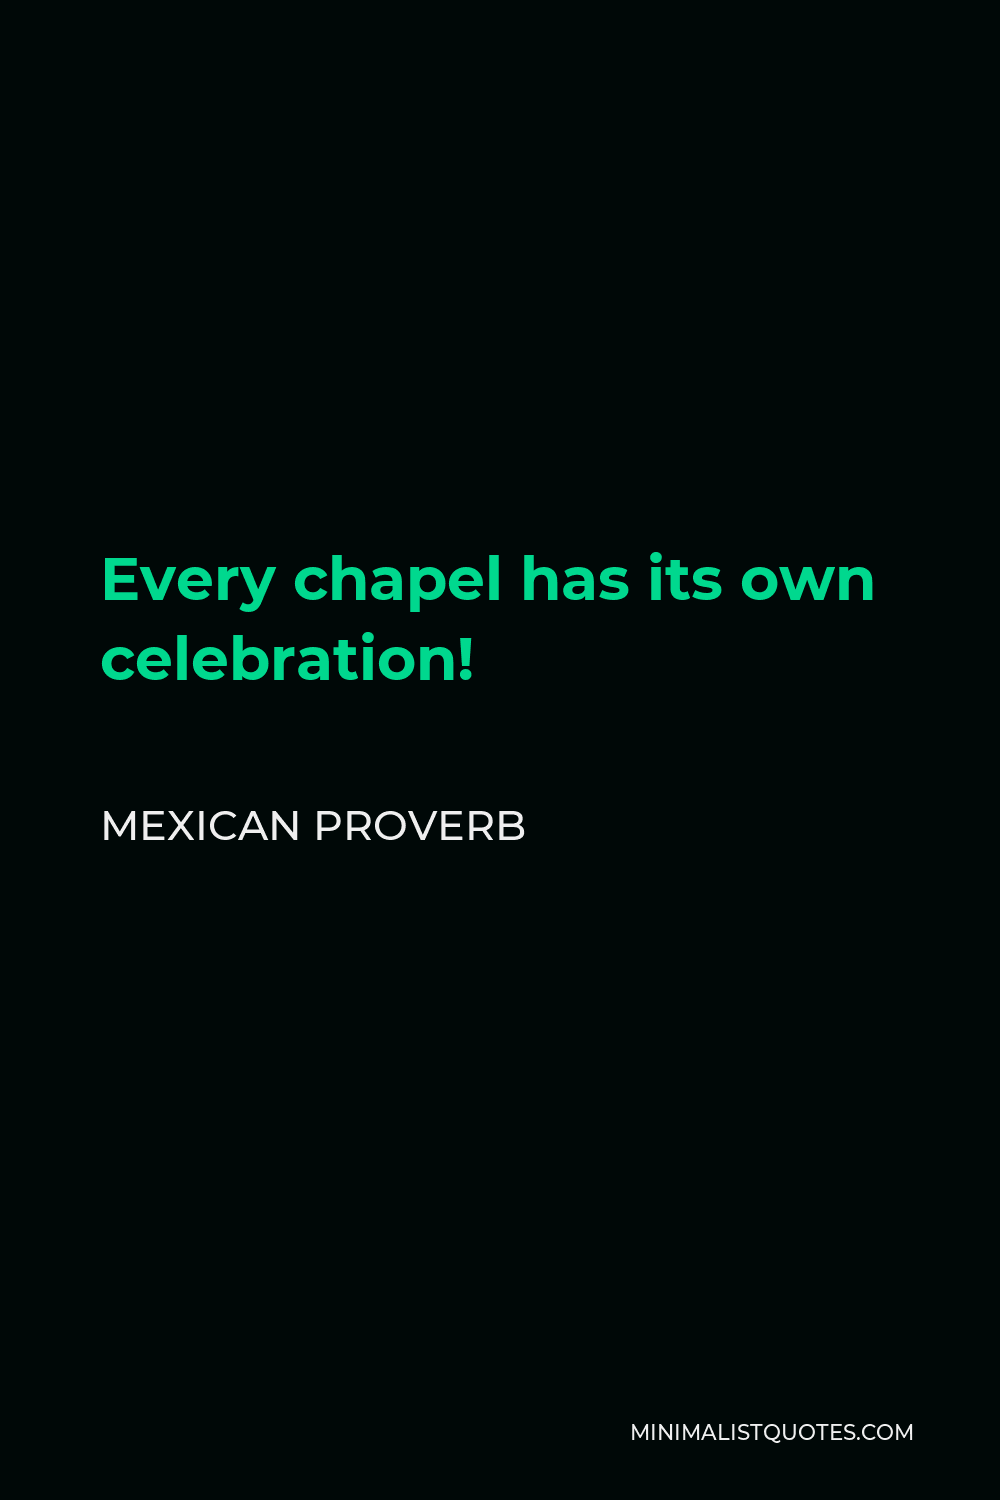 Mexican Proverb Quote - Every chapel has its own celebration!